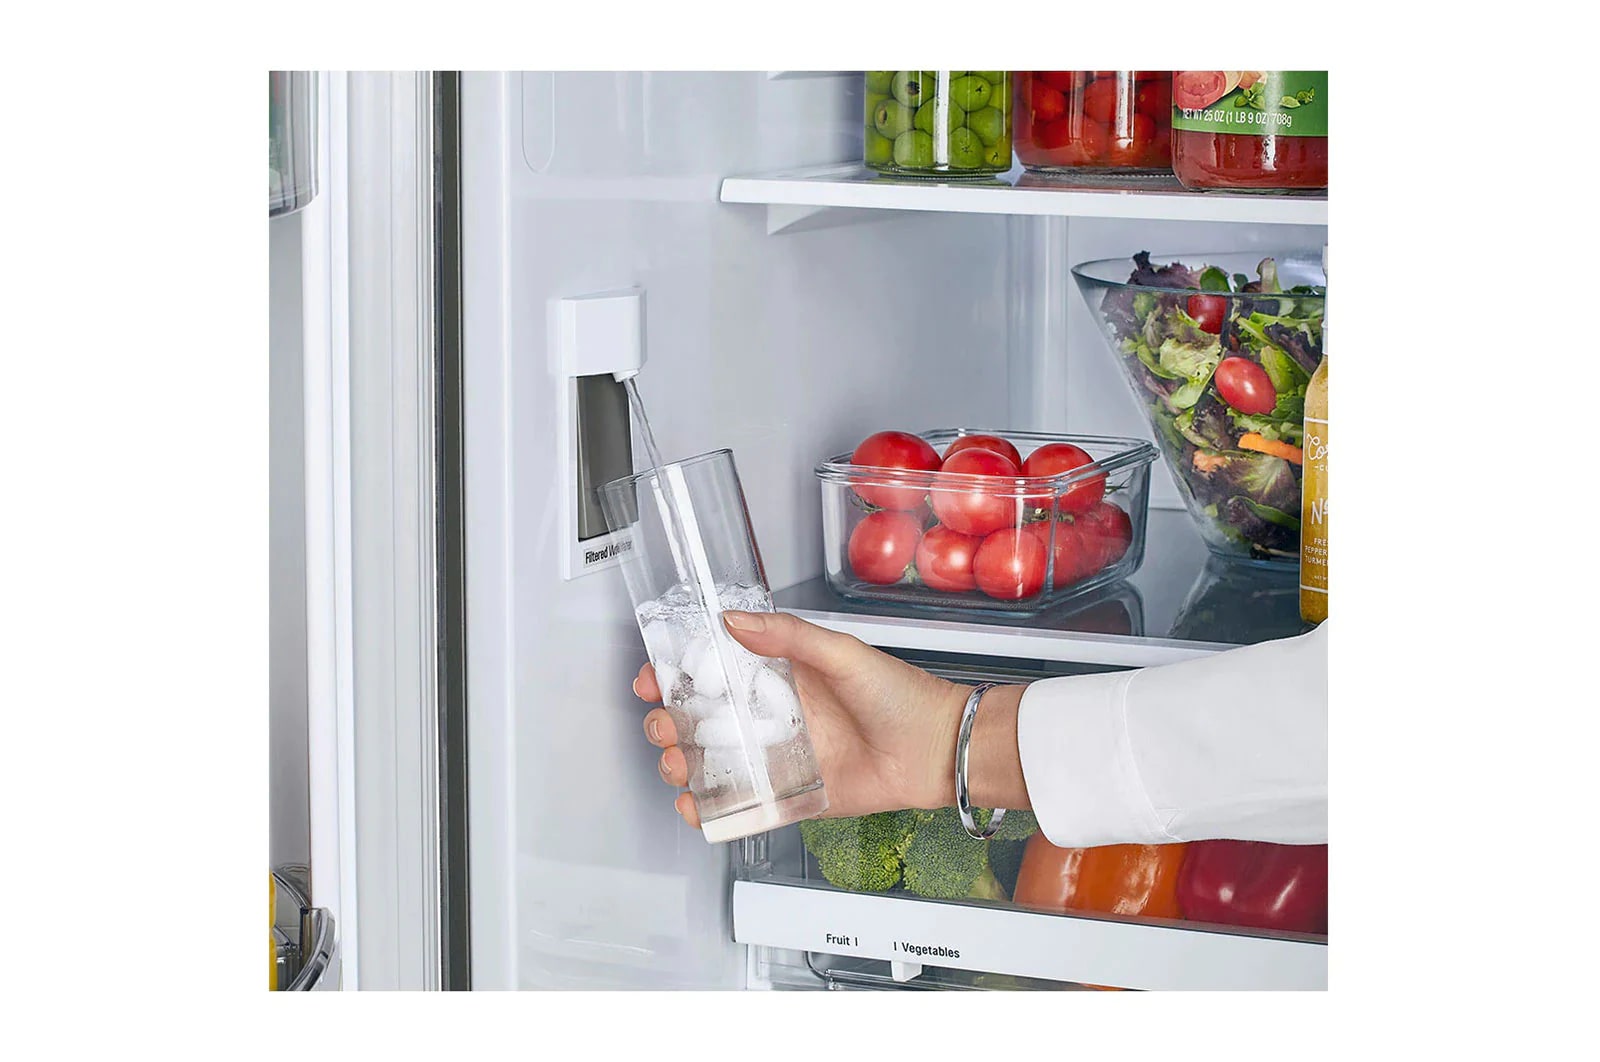 LG - 35.75 Inch 22.7 cu. ft French Door Refrigerator in Stainless - LMWC23626S